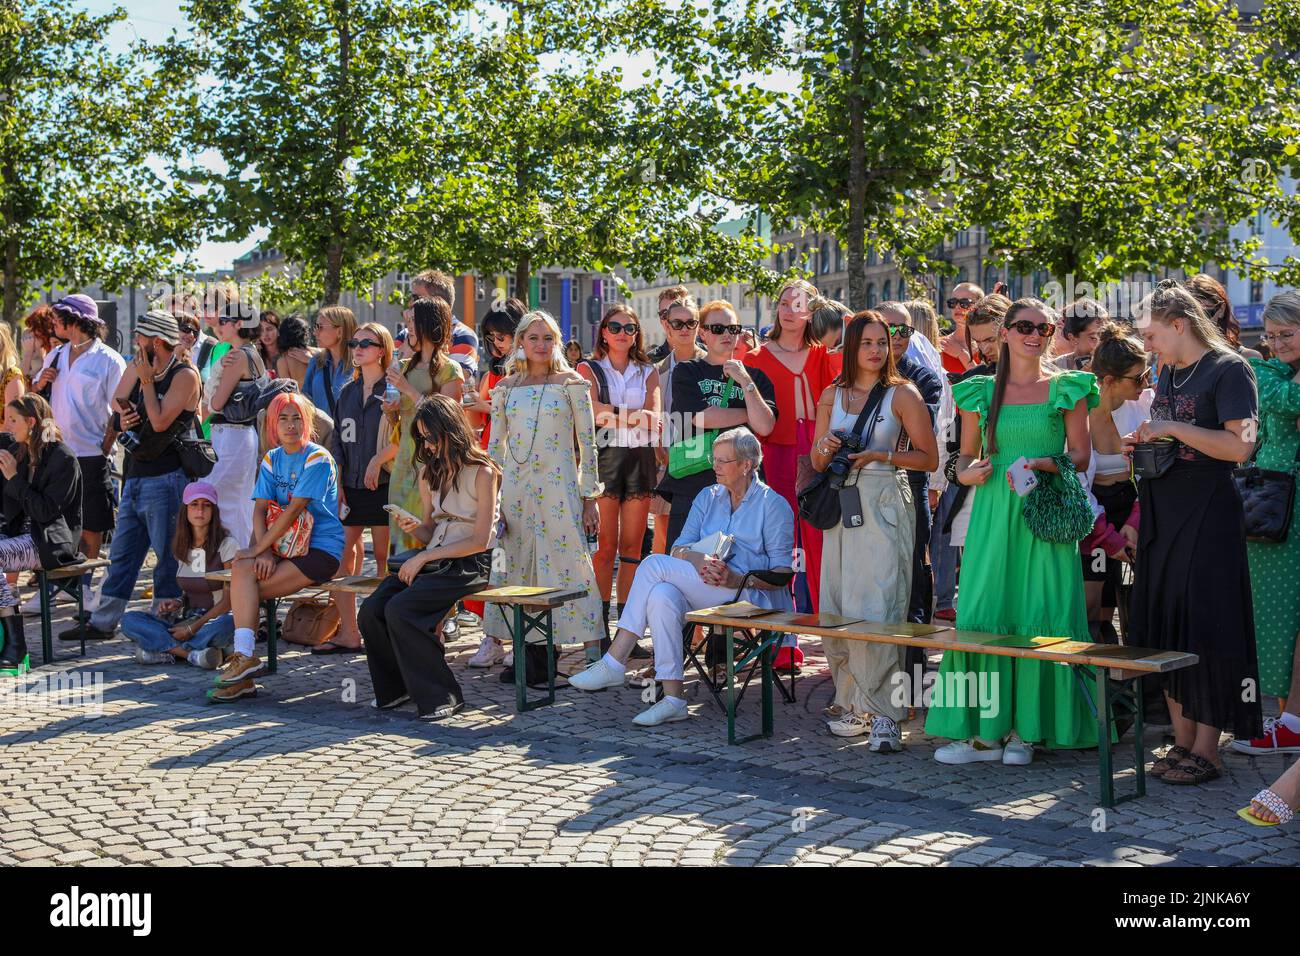 Guests waiting for the start of the fashion show of Saks Potts brand. Copenhagen Fashion Week is the biggest fashion event in the King's New Square, Scandinavia. This summer Fashion Week runs from 9th to 12th August. On the streets of the capital of Denmark a lot of fashionably dressed people. Stock Photo